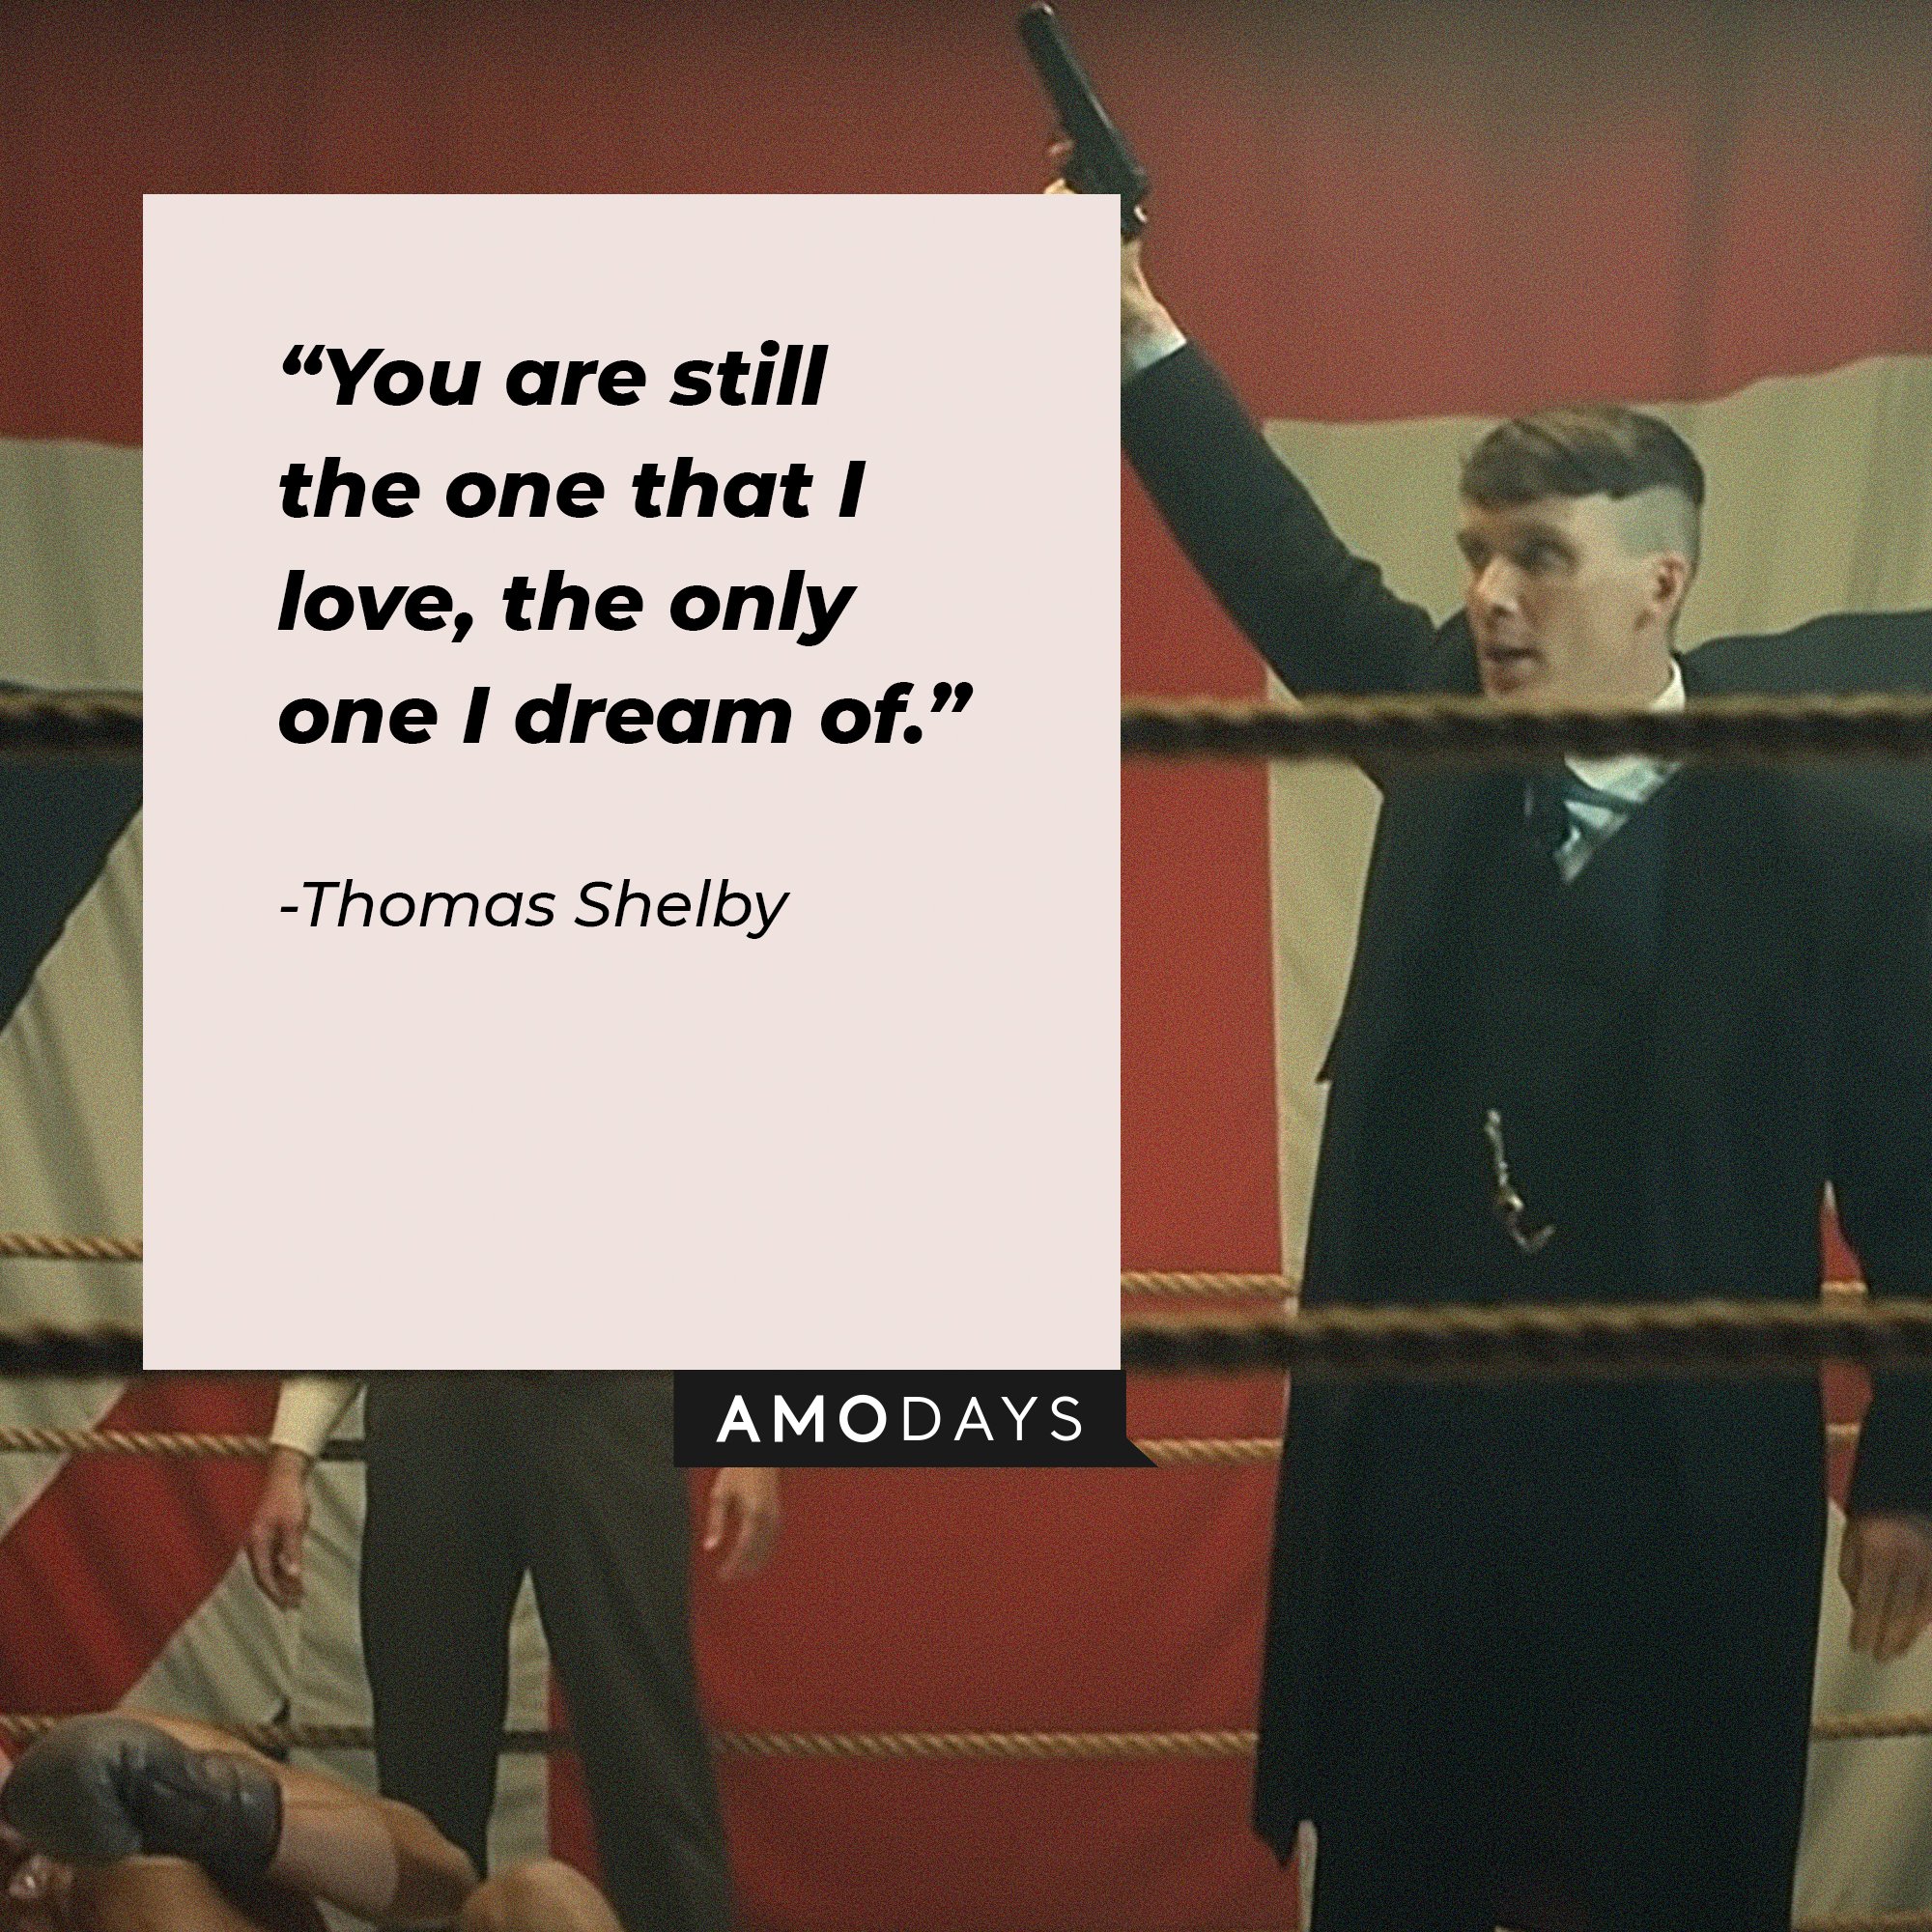 Thomas Shelby's quote: “You are still the one that I love, the only one I dream of.”  | Image: AmoDays